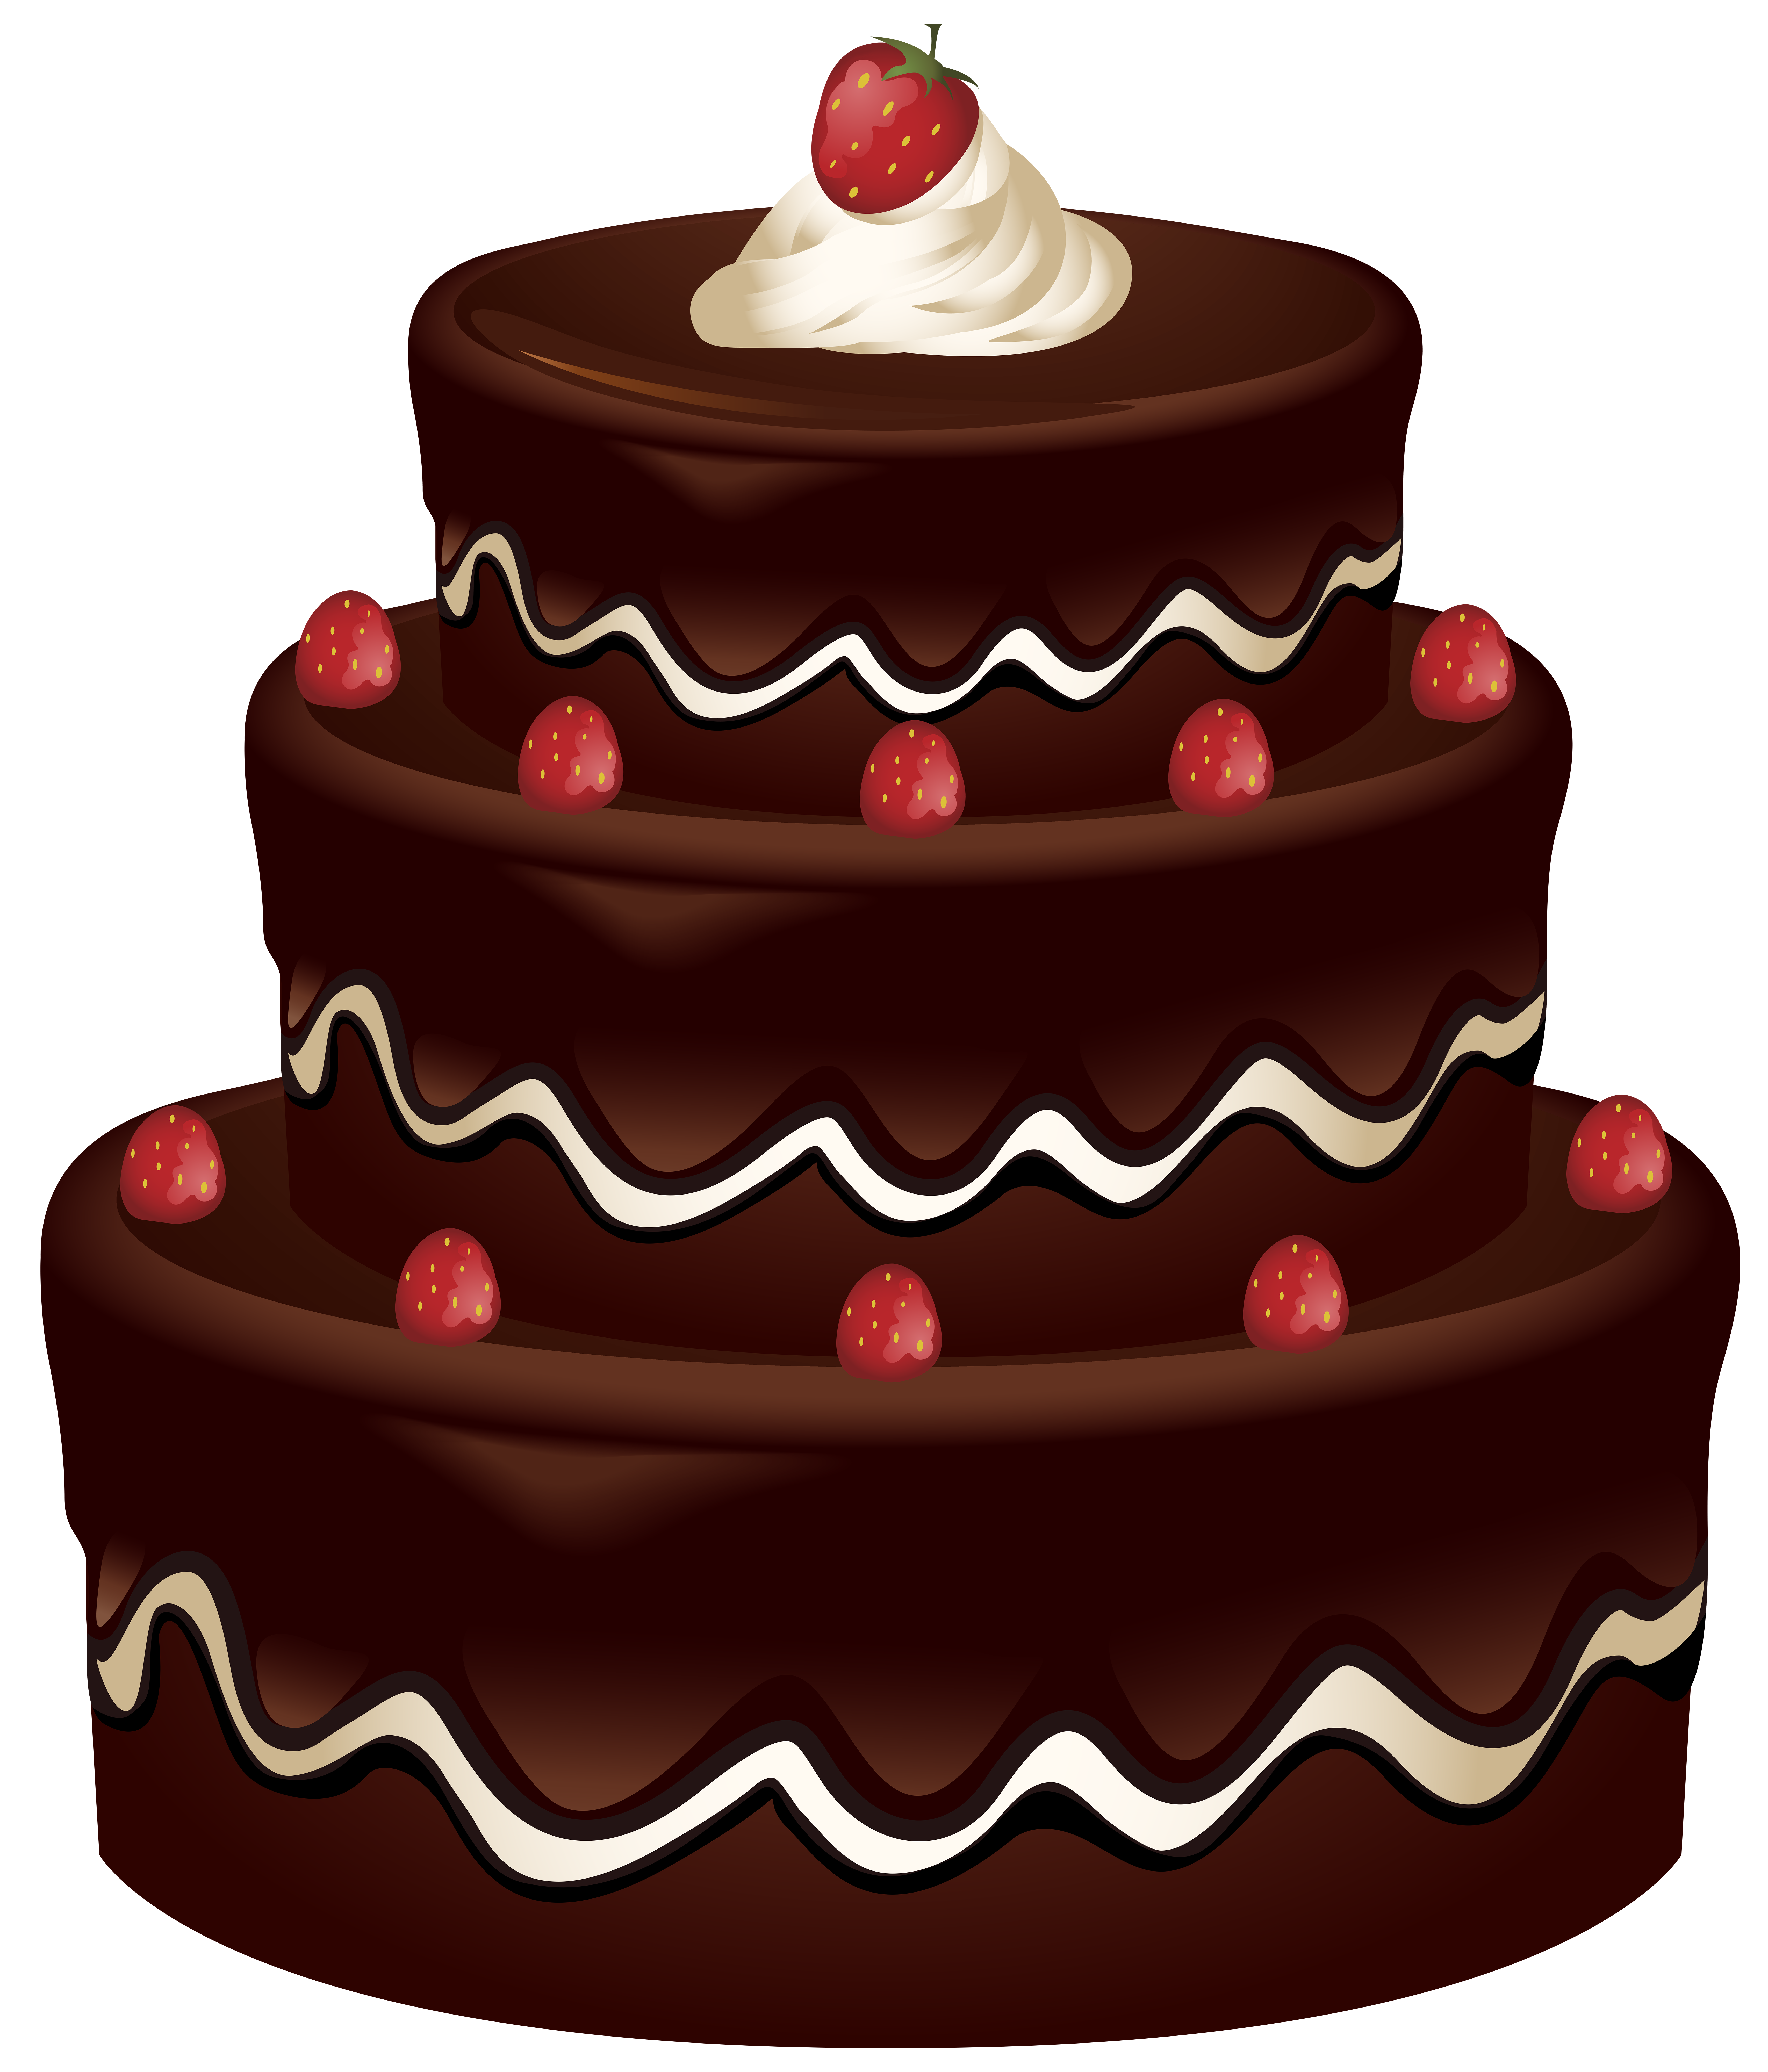 Cake Clip Art PNG Image | Gallery Yopriceville - High-Quality Images and Transparent ...6826 x 8000